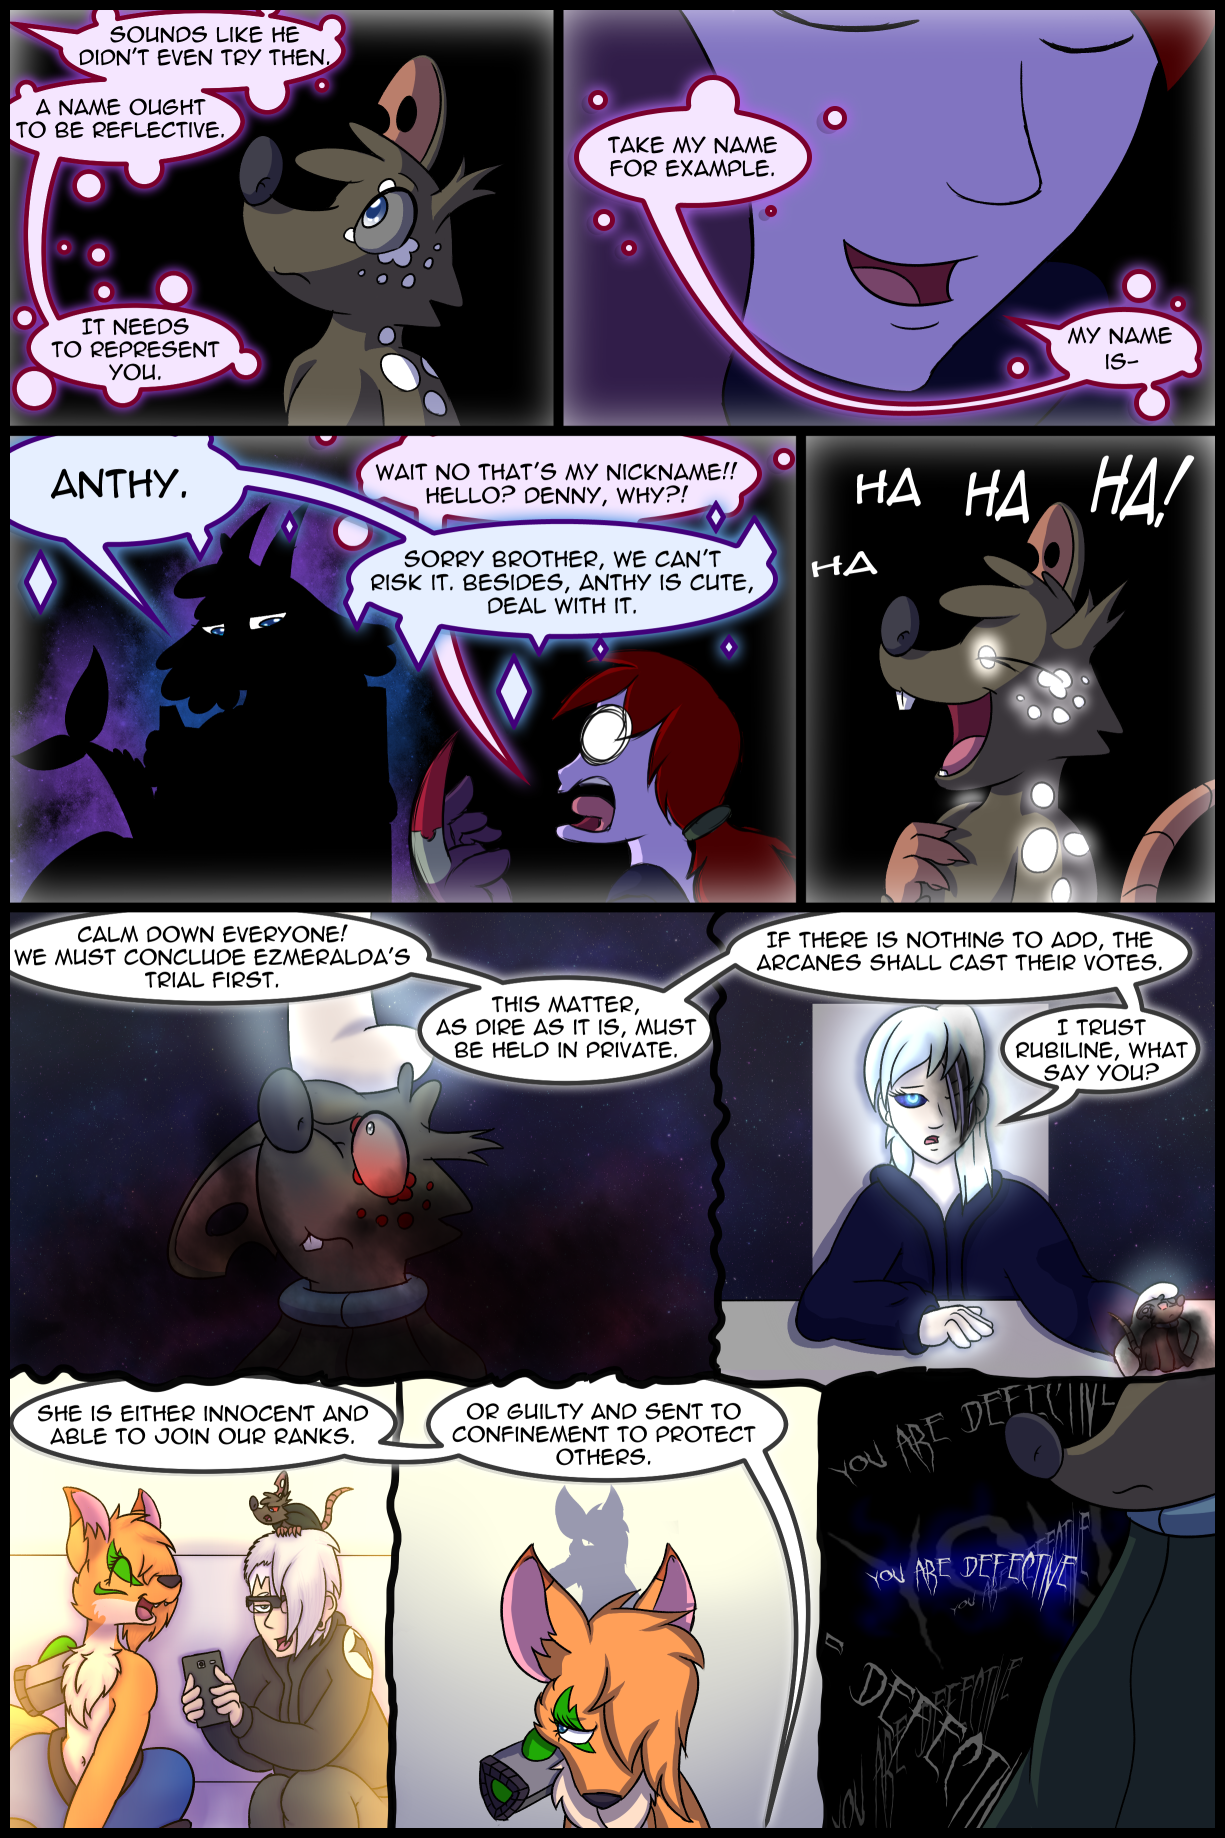 Ch4 Page 12 – The Vote